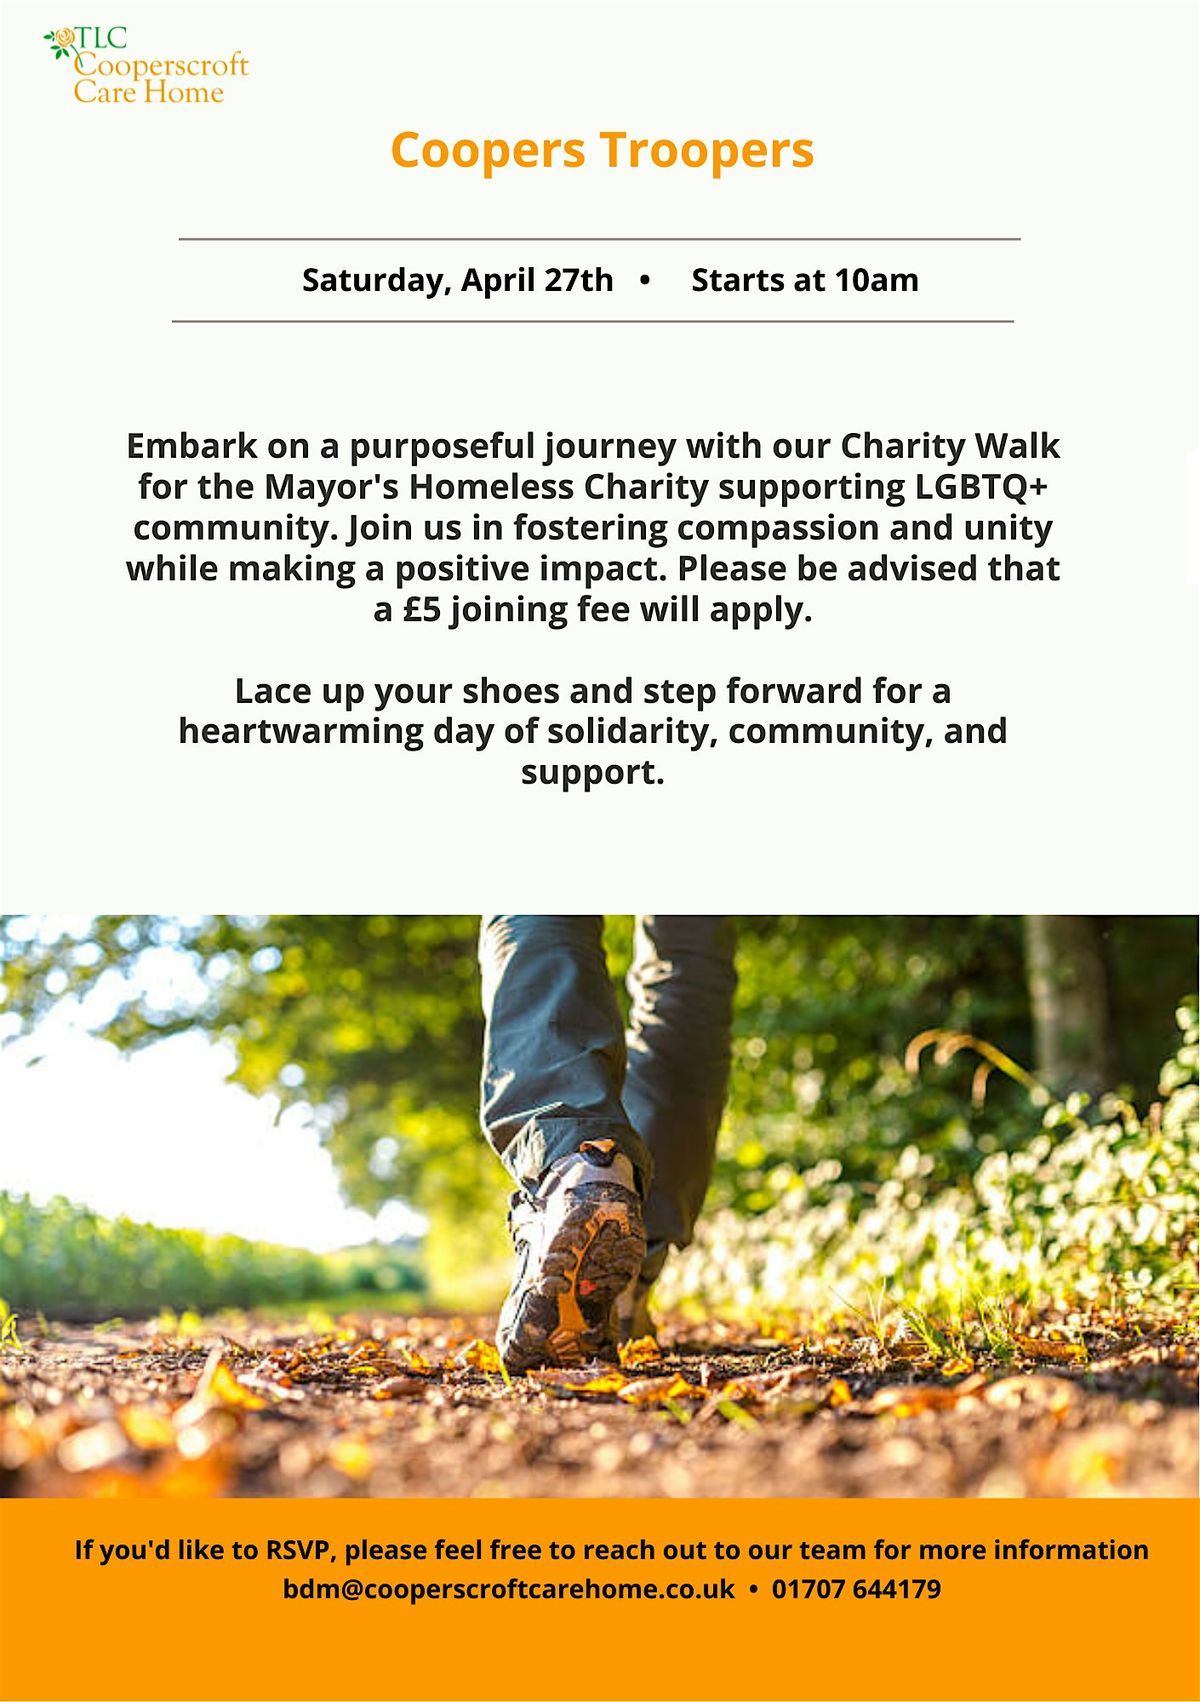 Coopers Troopers 3k walk for LGBTQ+ homeless charity, all proceeds go to the charity